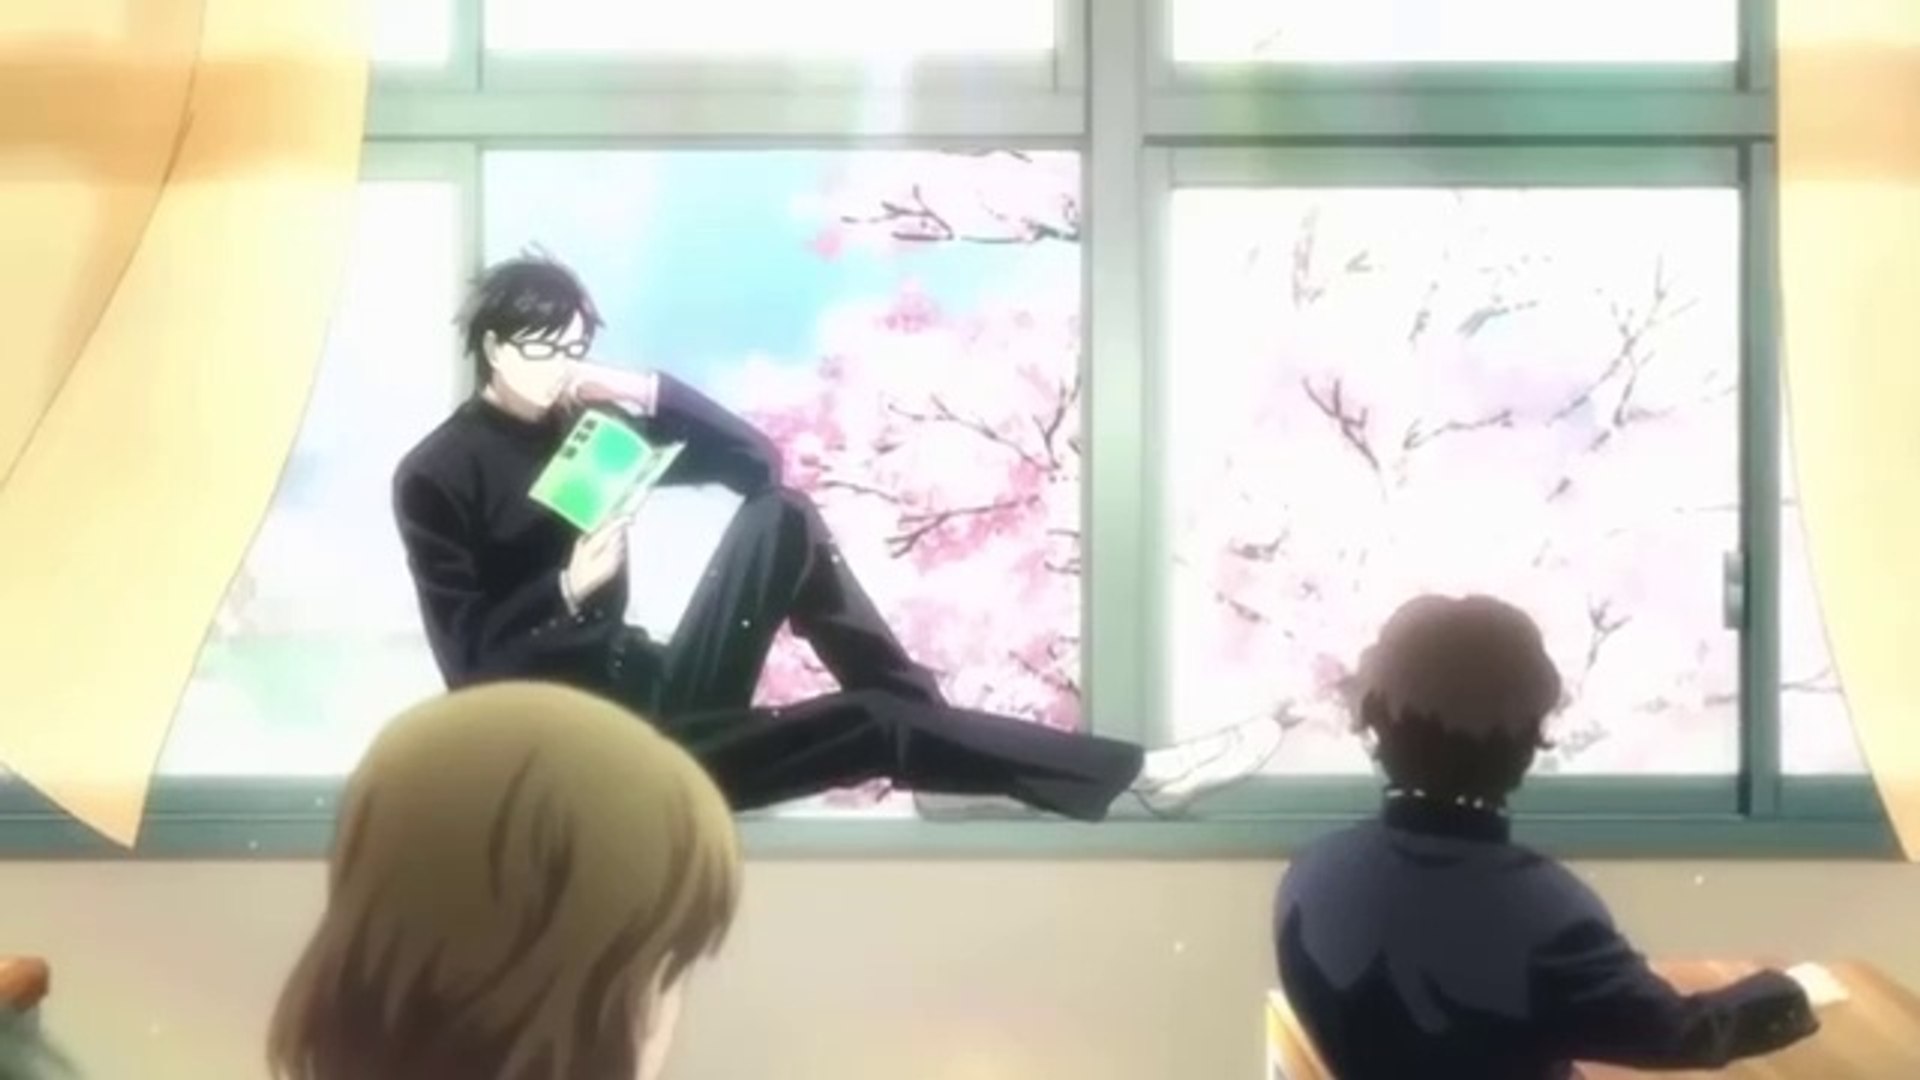 Haven't You Heard? I'm Sakamoto Episode 1 Hindi Dub . anime in india,anime  in hindi,indian anime,anime,anime india,hindi anime,indian anime is  bad,indian hate anime,indian anime kirtichow,india,indian references in  anime (hindi),indian characters in